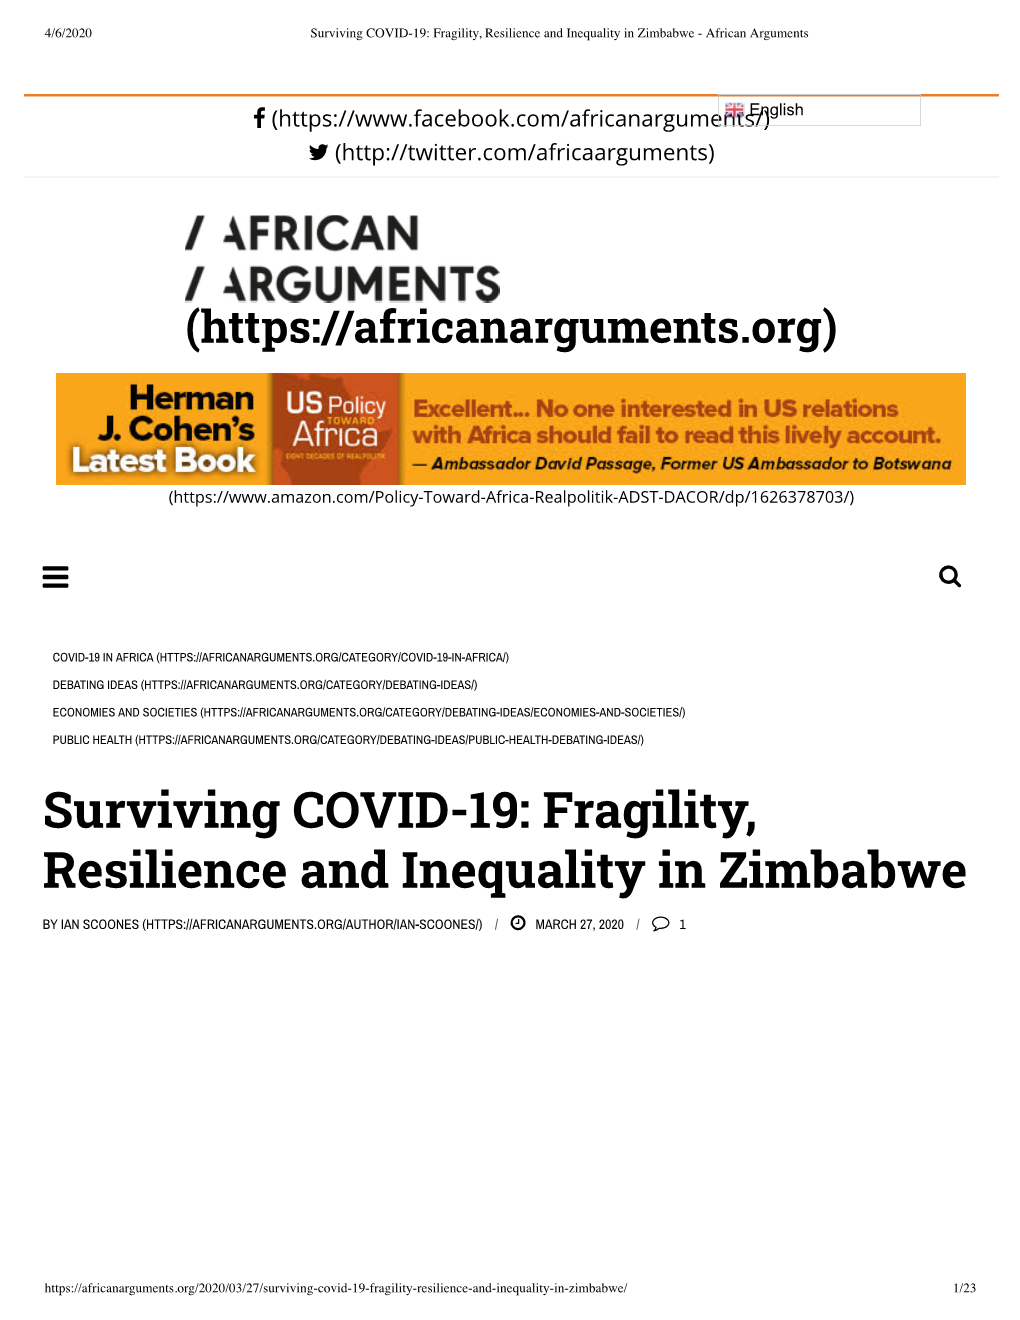 Surviving COVID-19: Fragility, Resilience and Inequality in Zimbabwe - African Arguments